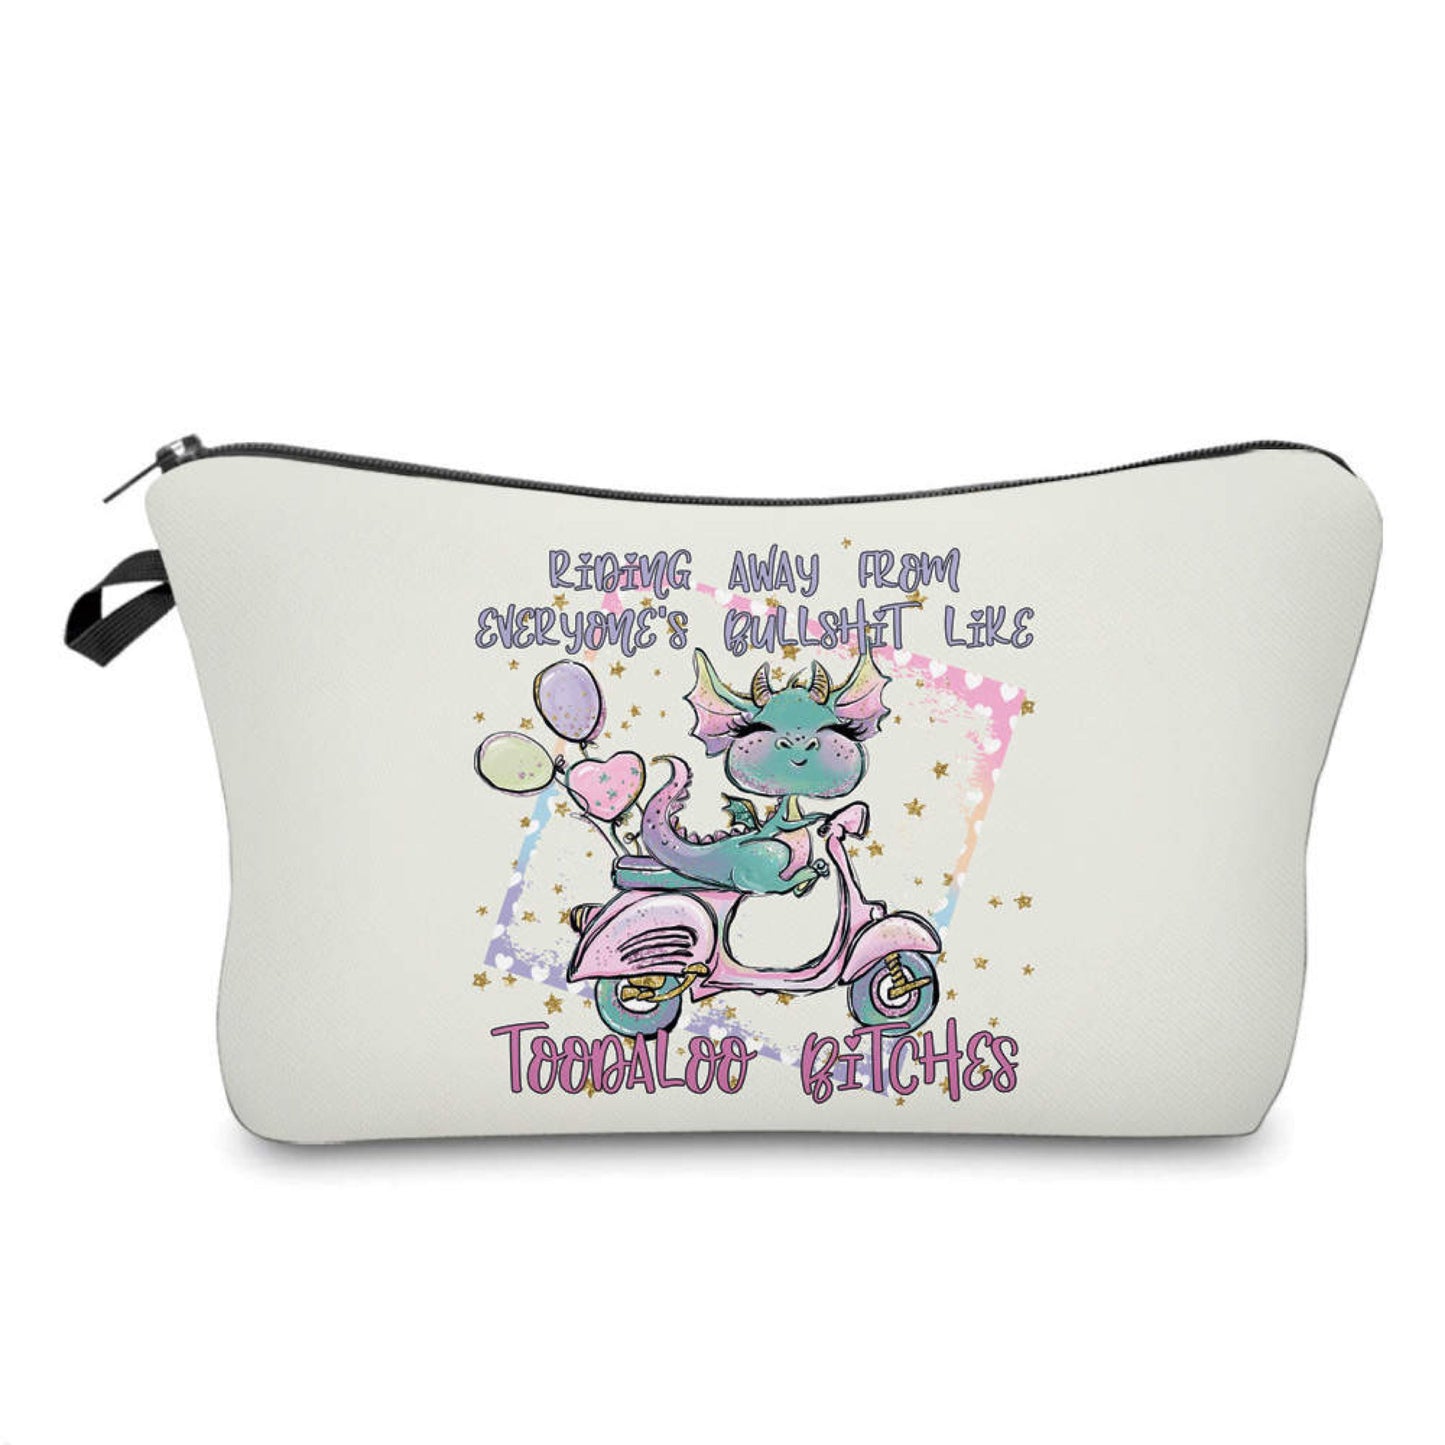 Toodaloo Bitches - Water-Resistant Multi-Use Pouch